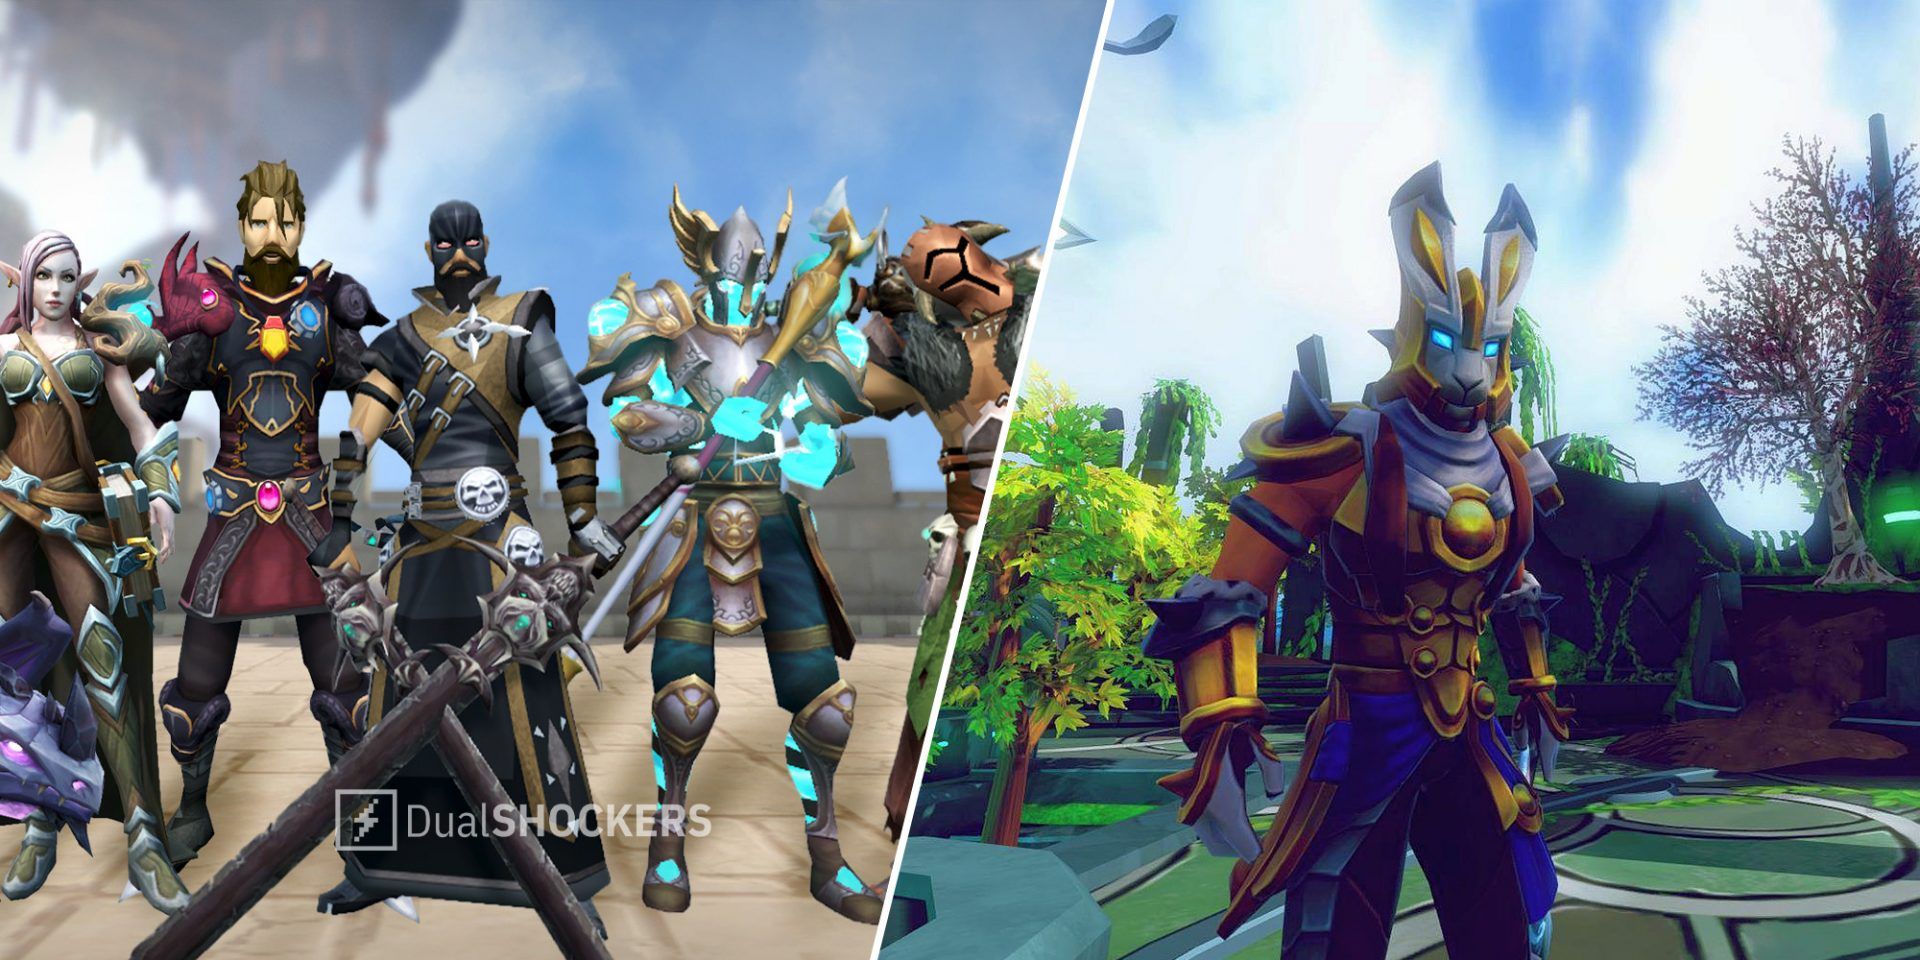 RuneScape Mobile character lineup on left, character player on right